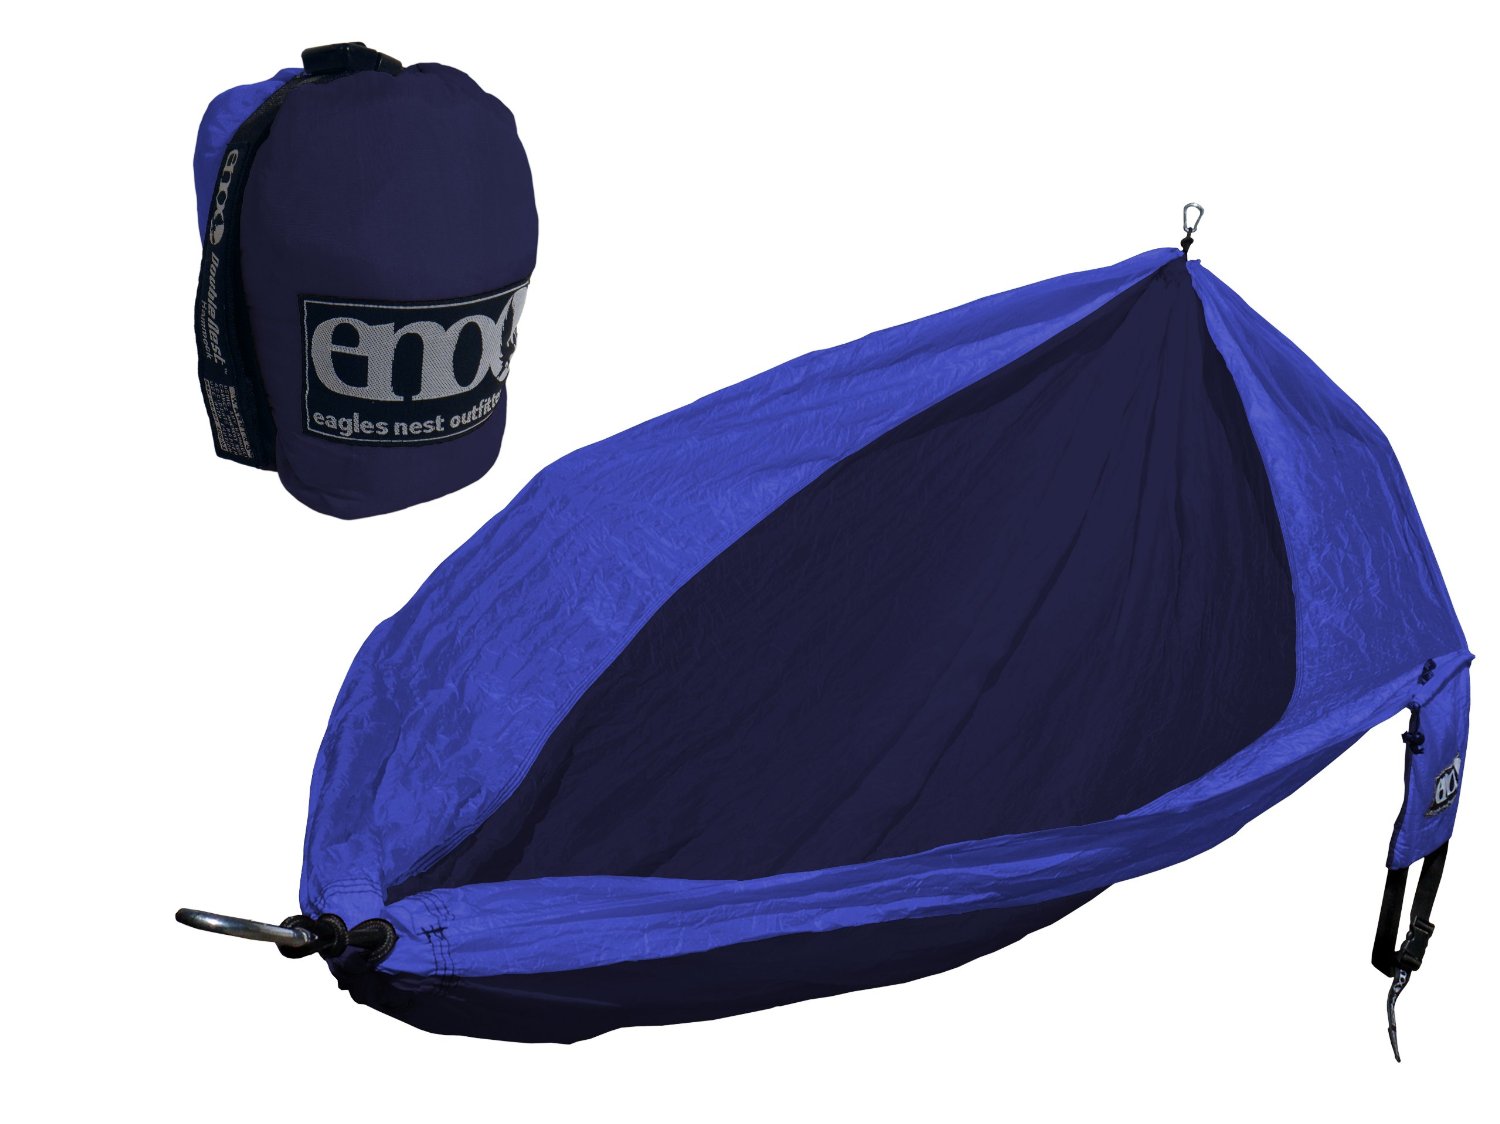 Eagles Nest Outfitters' DoubleNest Hammock. ($70)